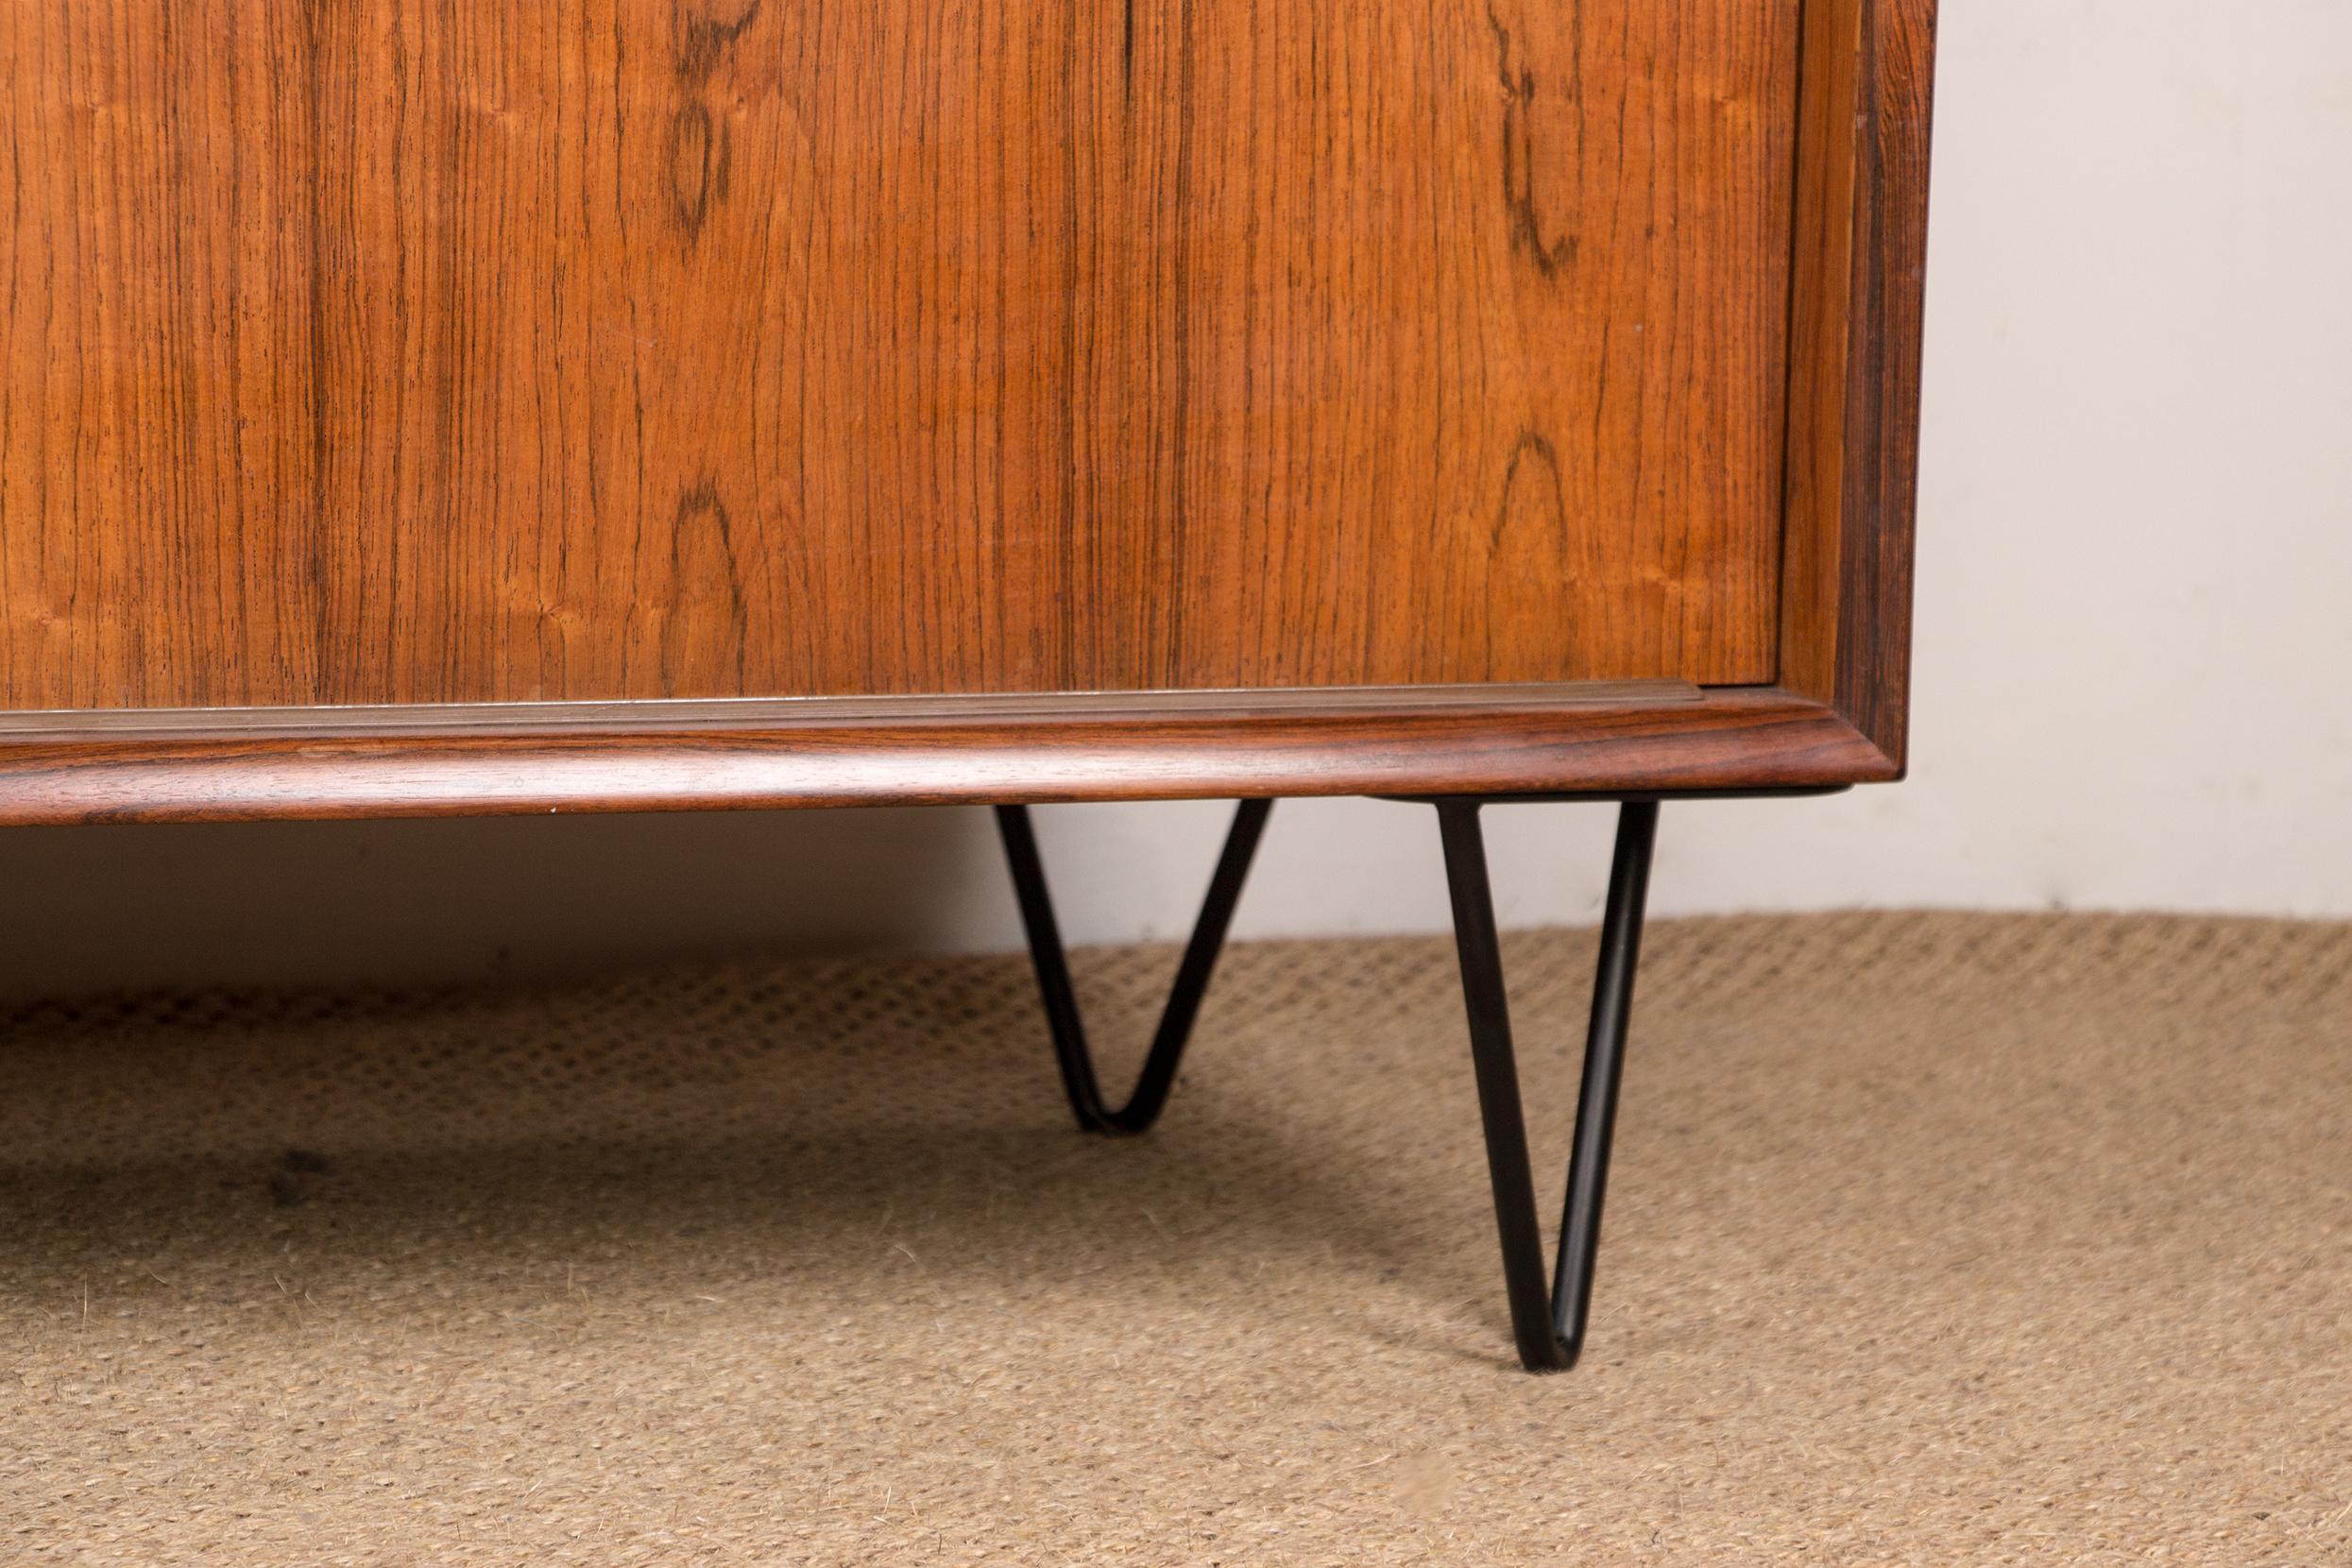 Mid-20th Century Small Danish Rosewood Sideboard by Arne Vodder for Sibast Furnitures 1960.